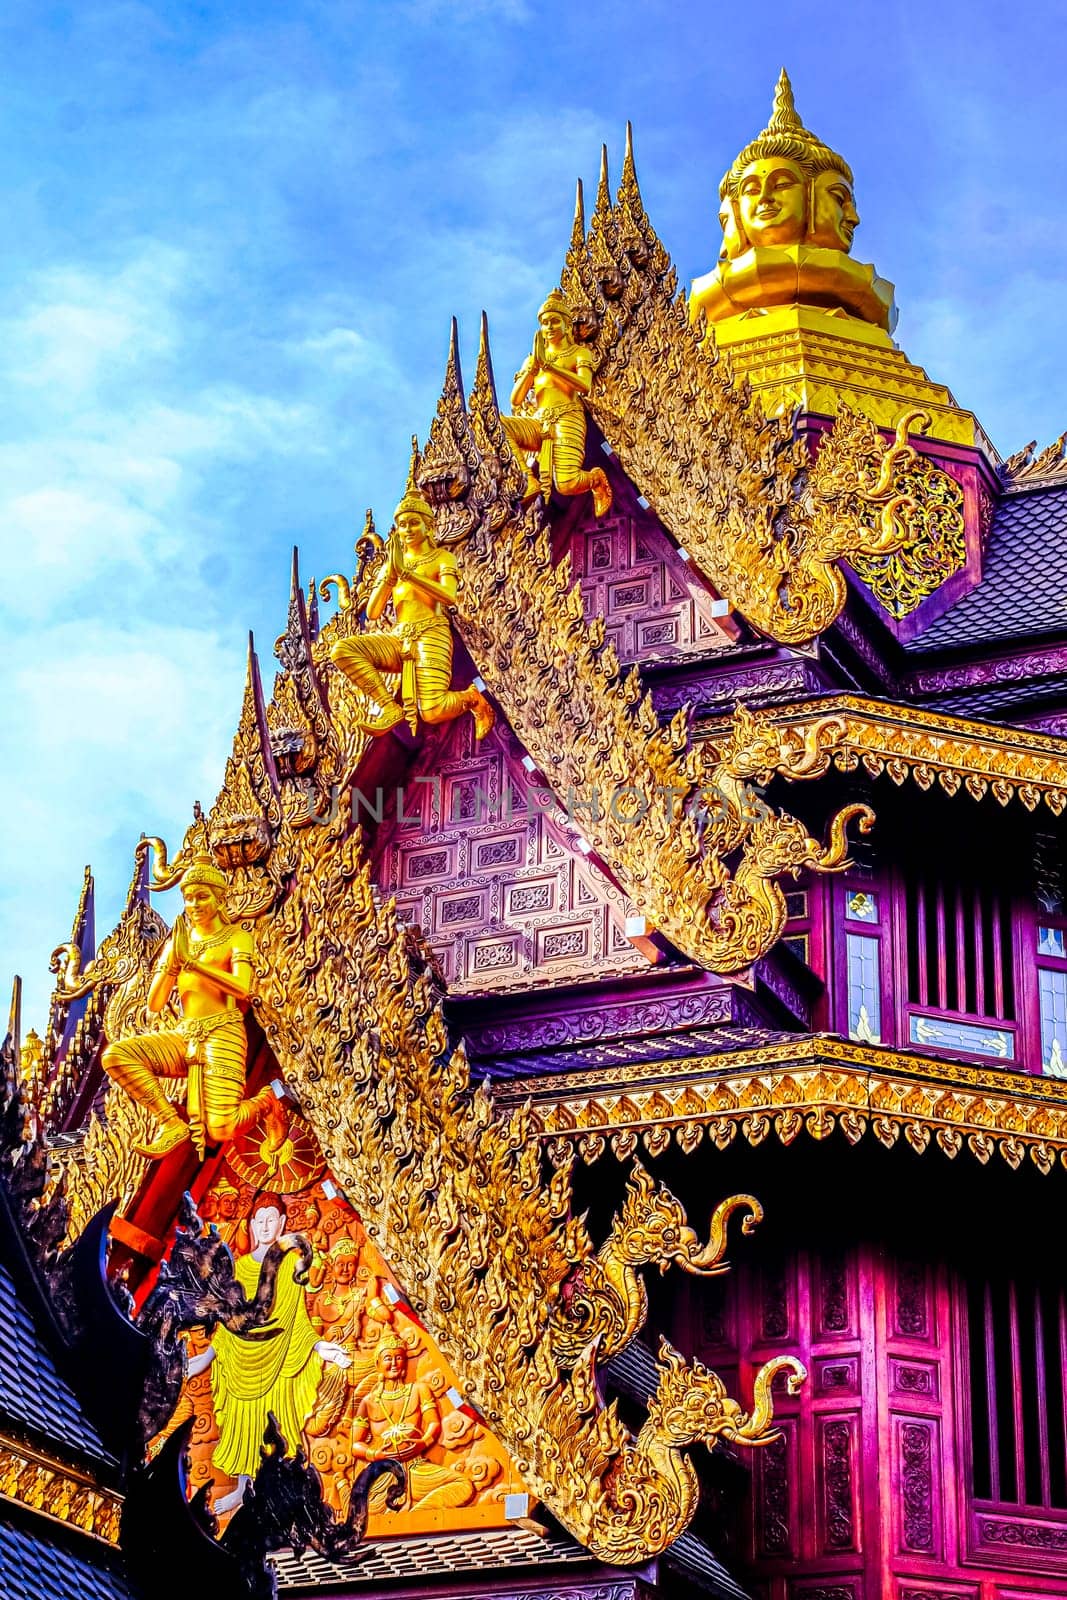 Traditional Thai Style Animal Gods Carved on Roof Decorations Against a Blue Sky by Petrichor